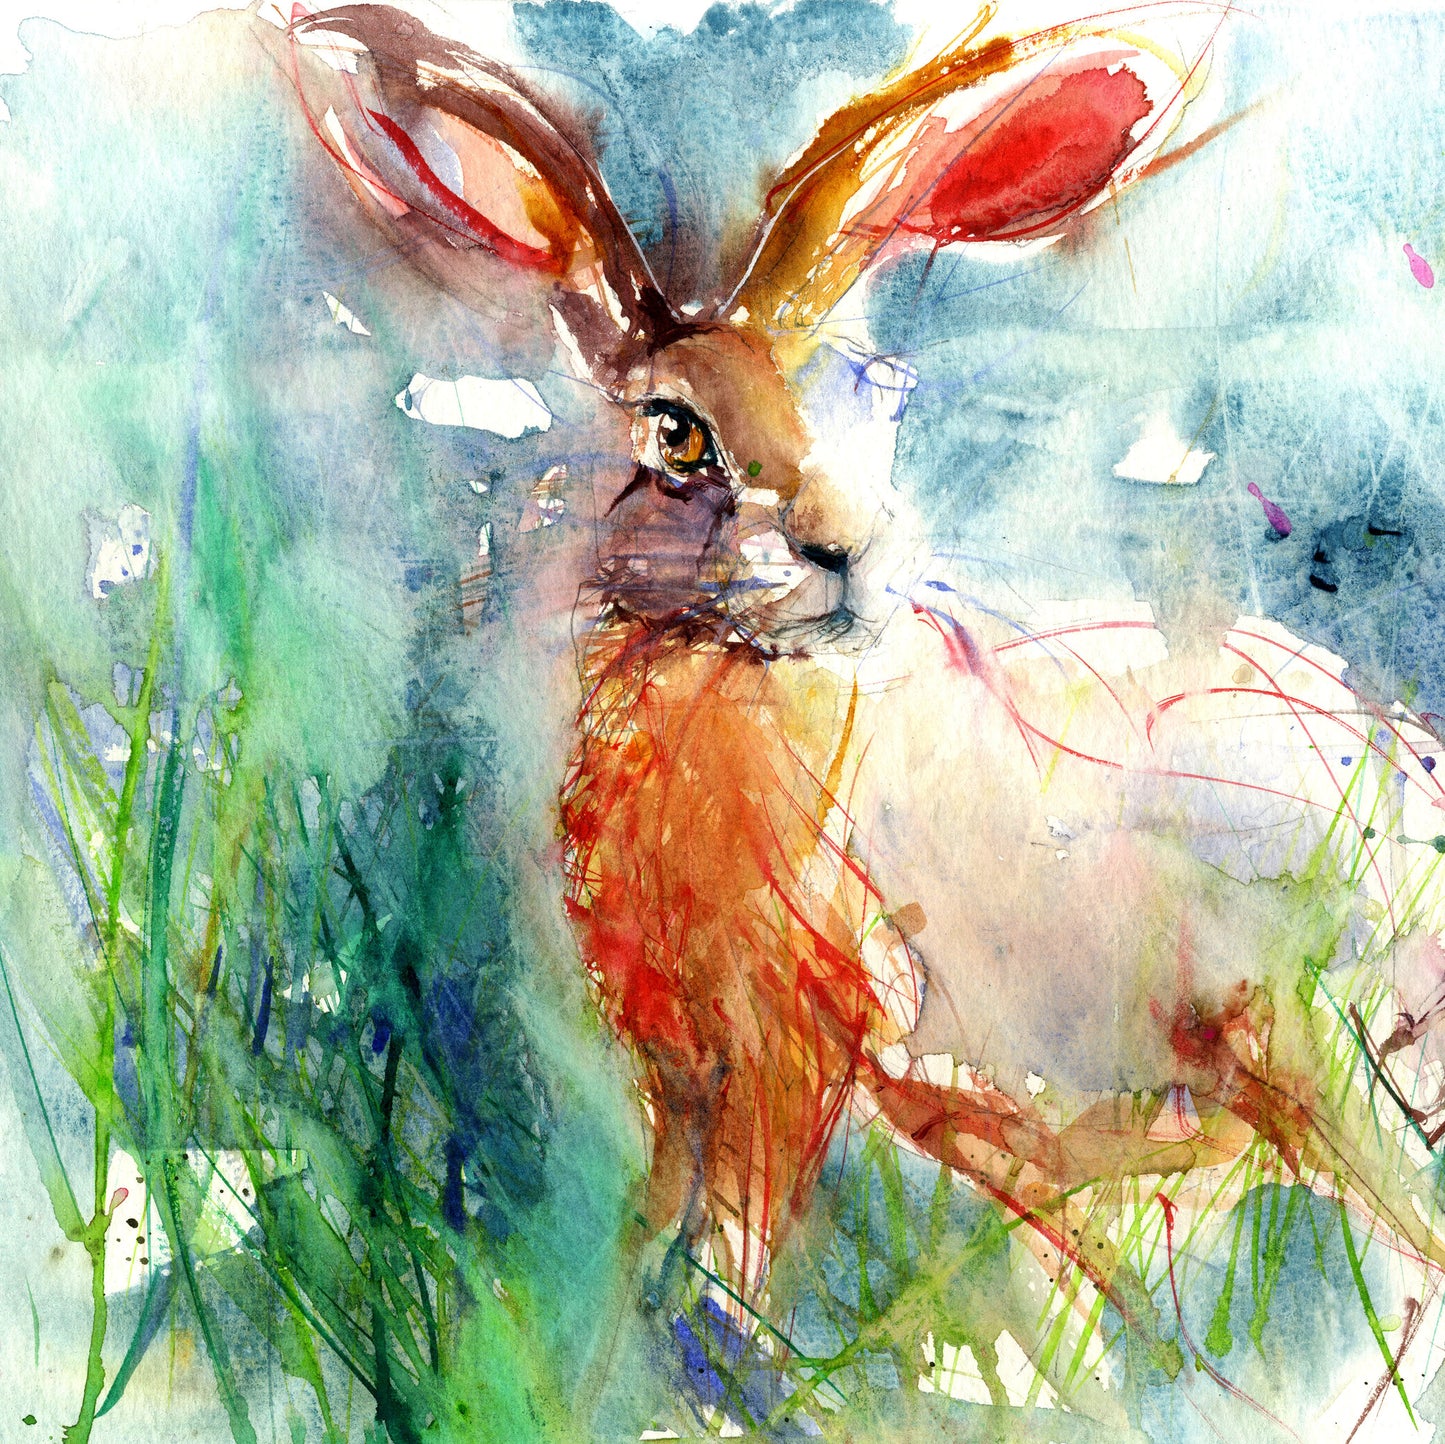 limited edition hare print from an original watercolour - Jen Buckley Art limited edition animal art prints